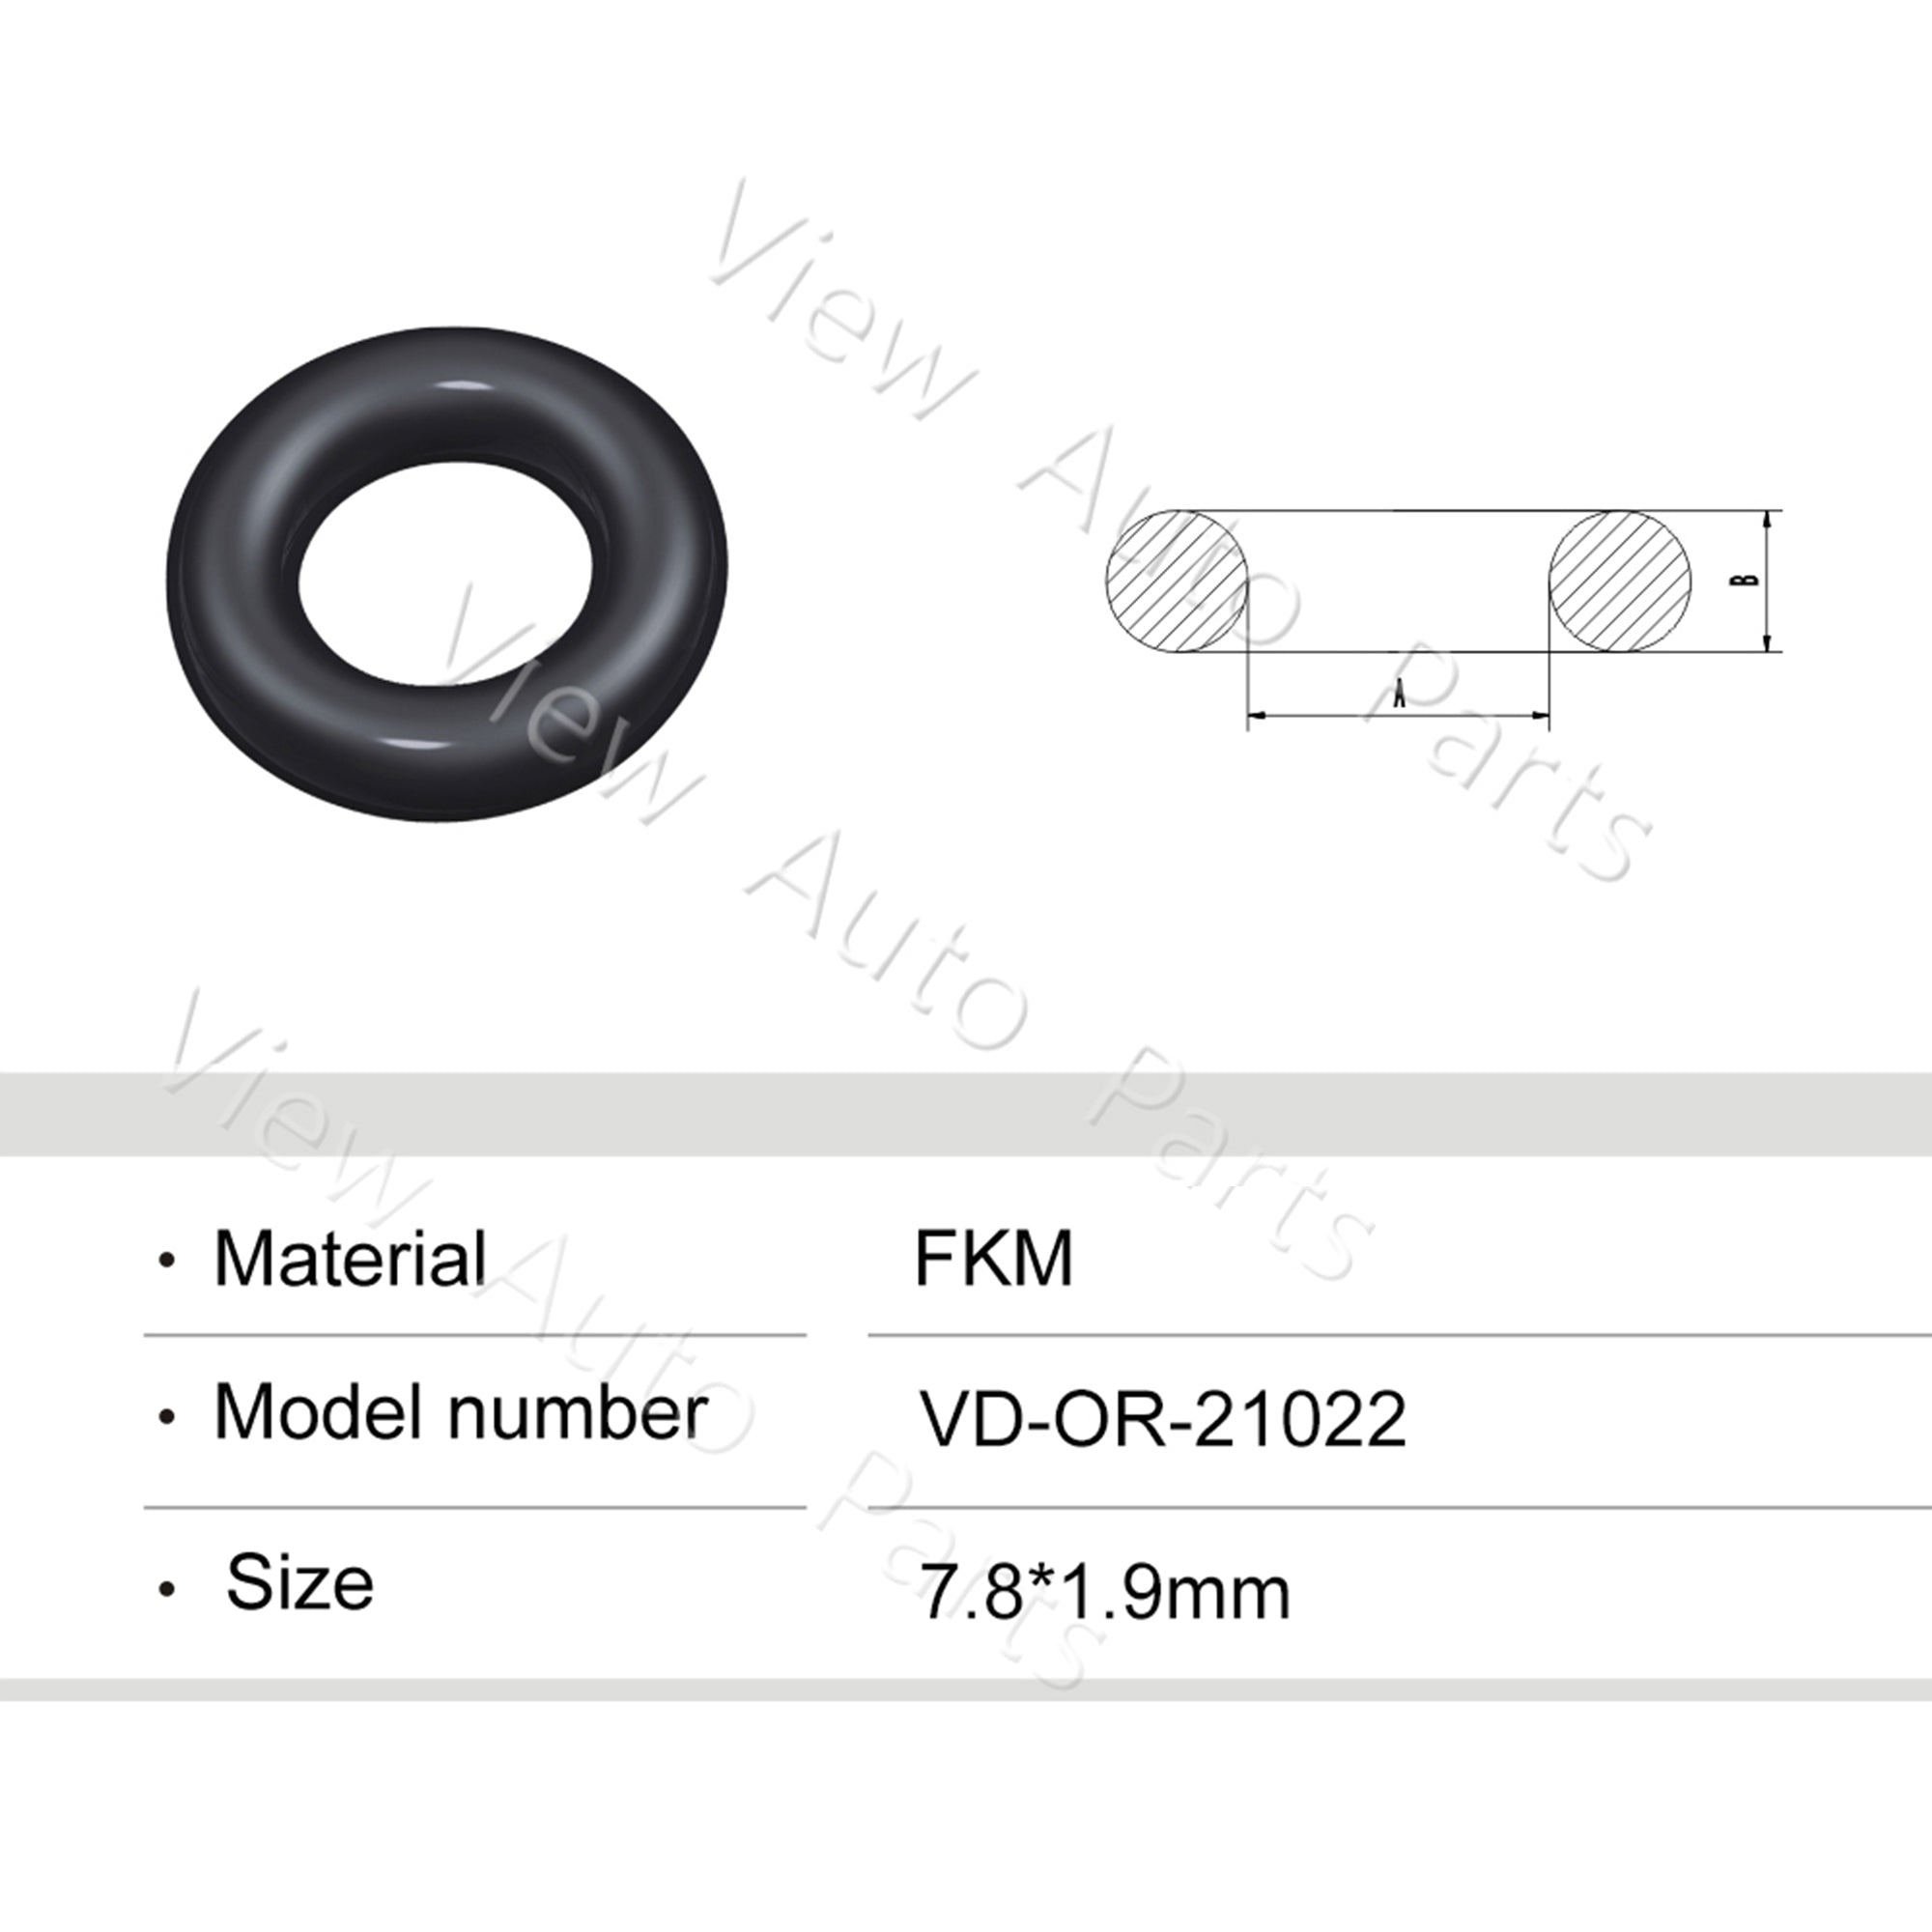 Fuel Injector Rubber Seal Orings for Toyota ASNU17 Fuel Injector Repair Kits FKM & Rubber Heat Resistant, Size: 7.8*1.9mm OR-21022